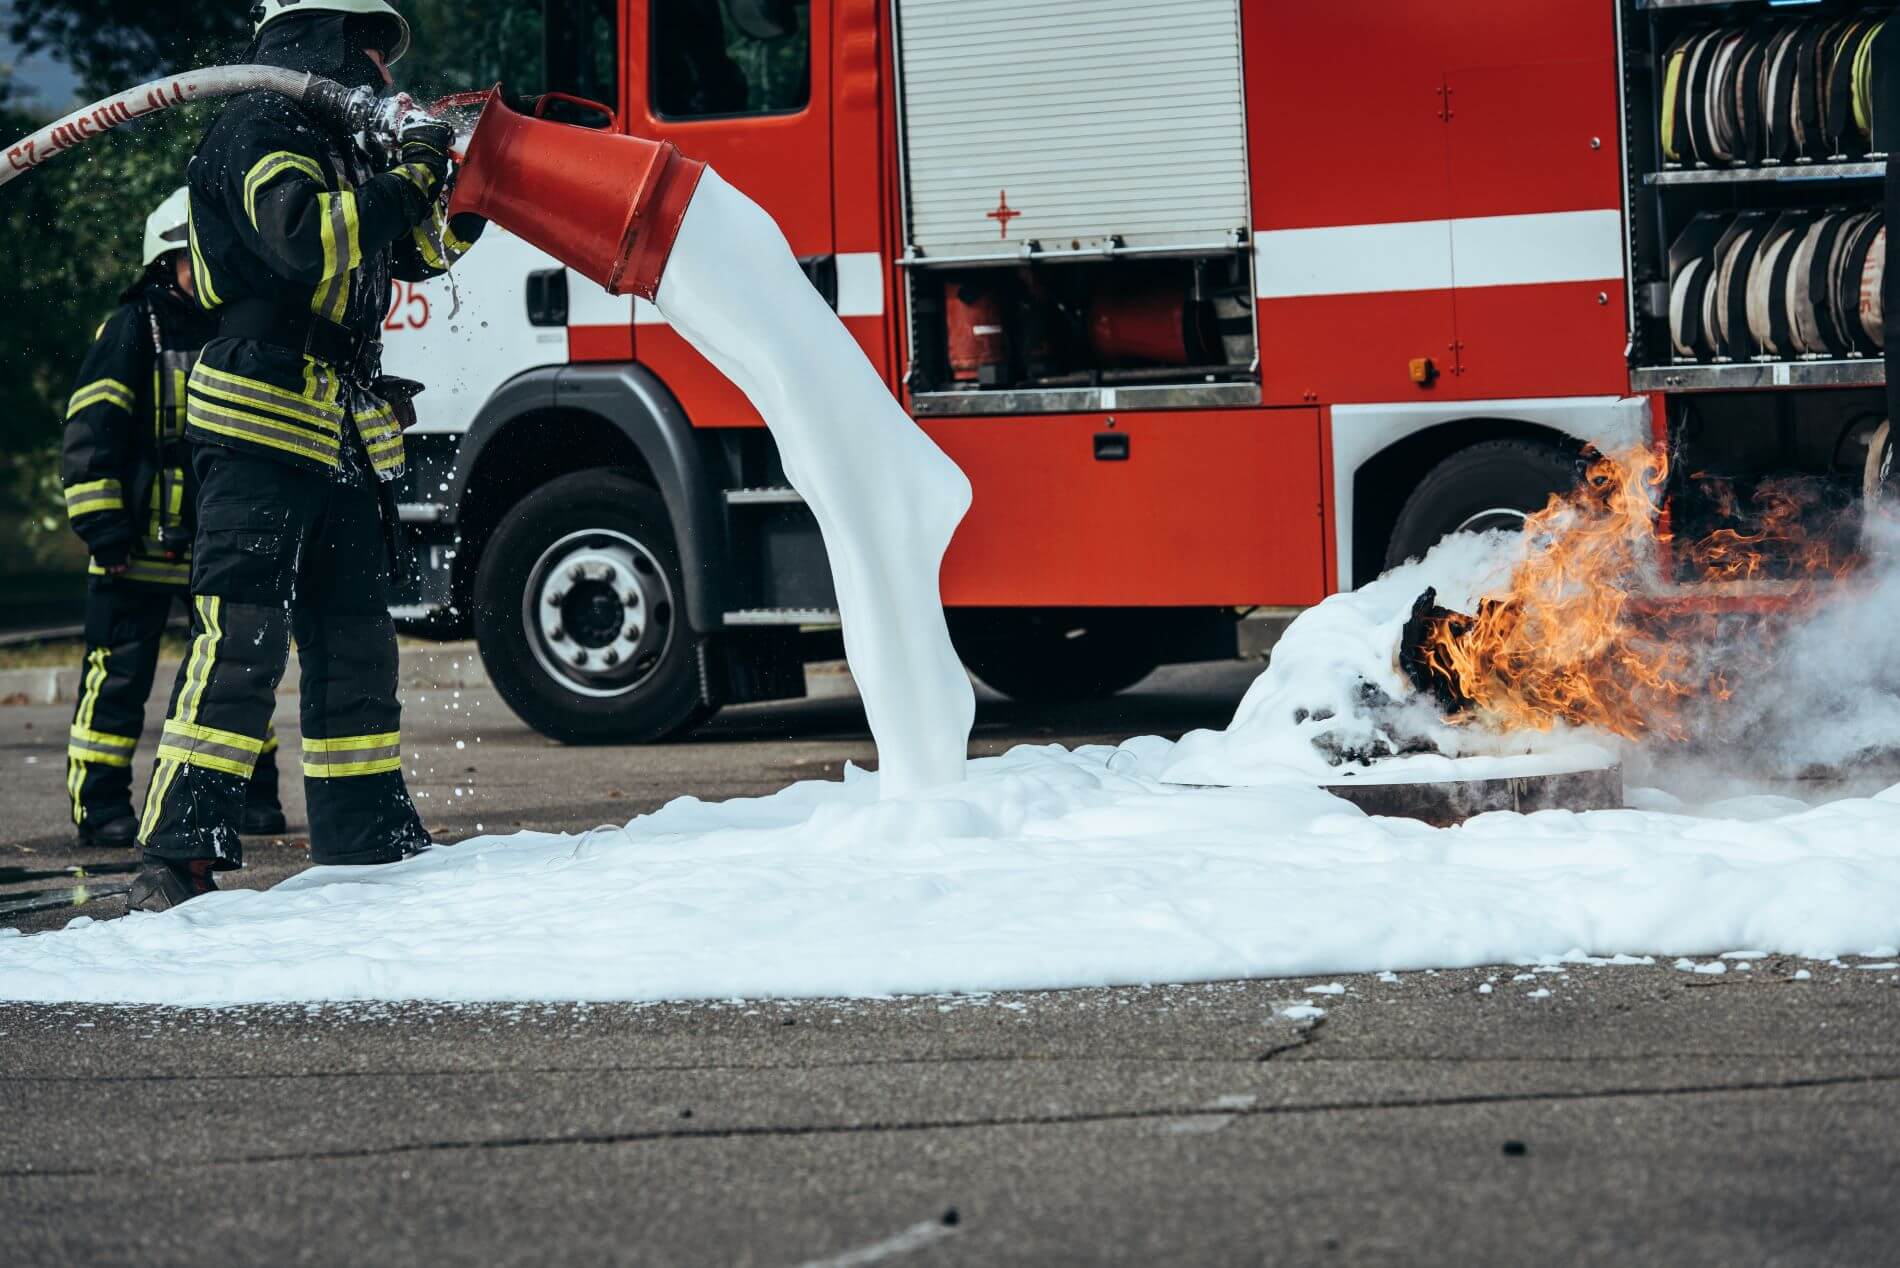 Fire fighter using suppressant foam on a fire. The foam can contain endocrine disrupting chemicals.